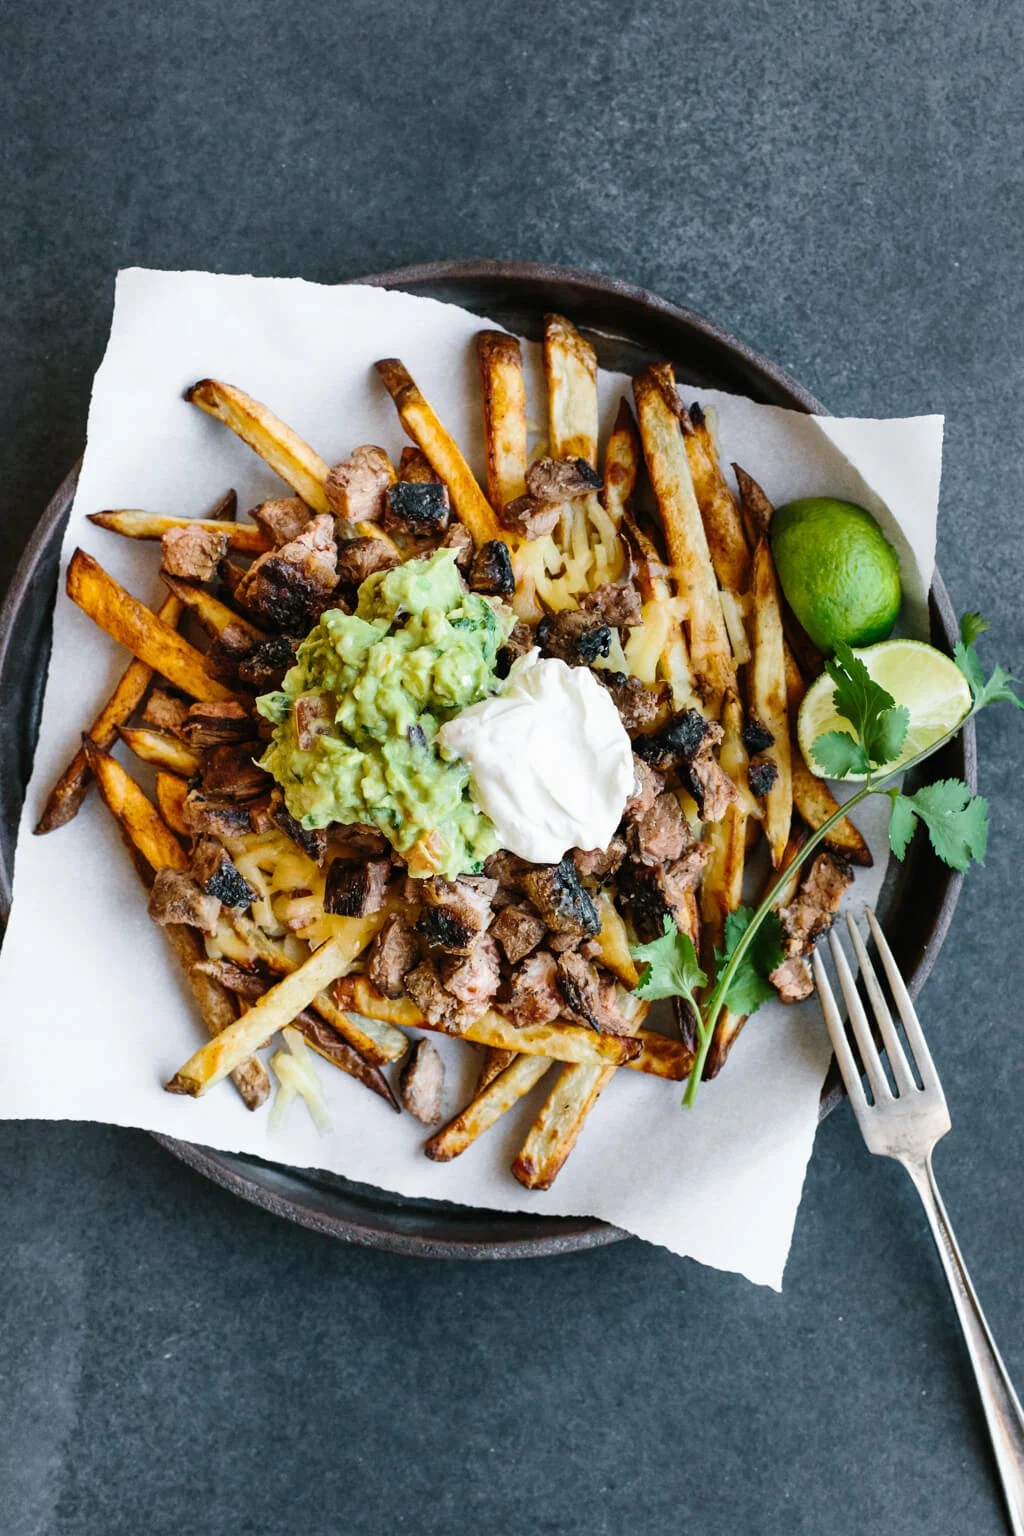 Fries topped with carne asada, guacamole and sour cream on a plate.